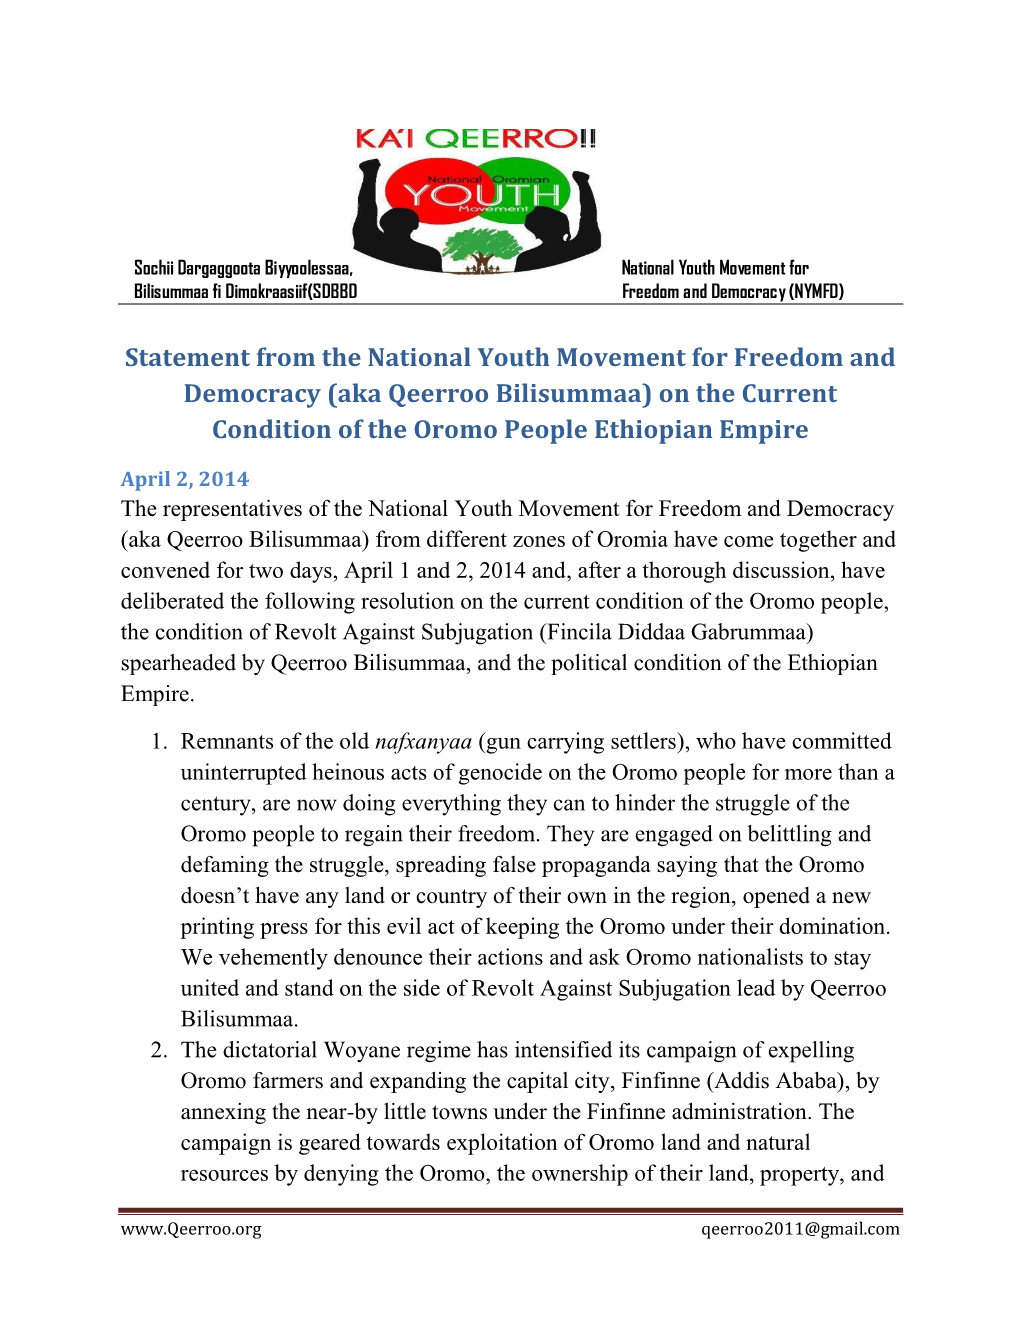 Statement from the National Youth Movement for Freedom and Democracy (Aka Qeerroo Bilisummaa) on the Current Condition of the Oromo People Ethiopian Empire